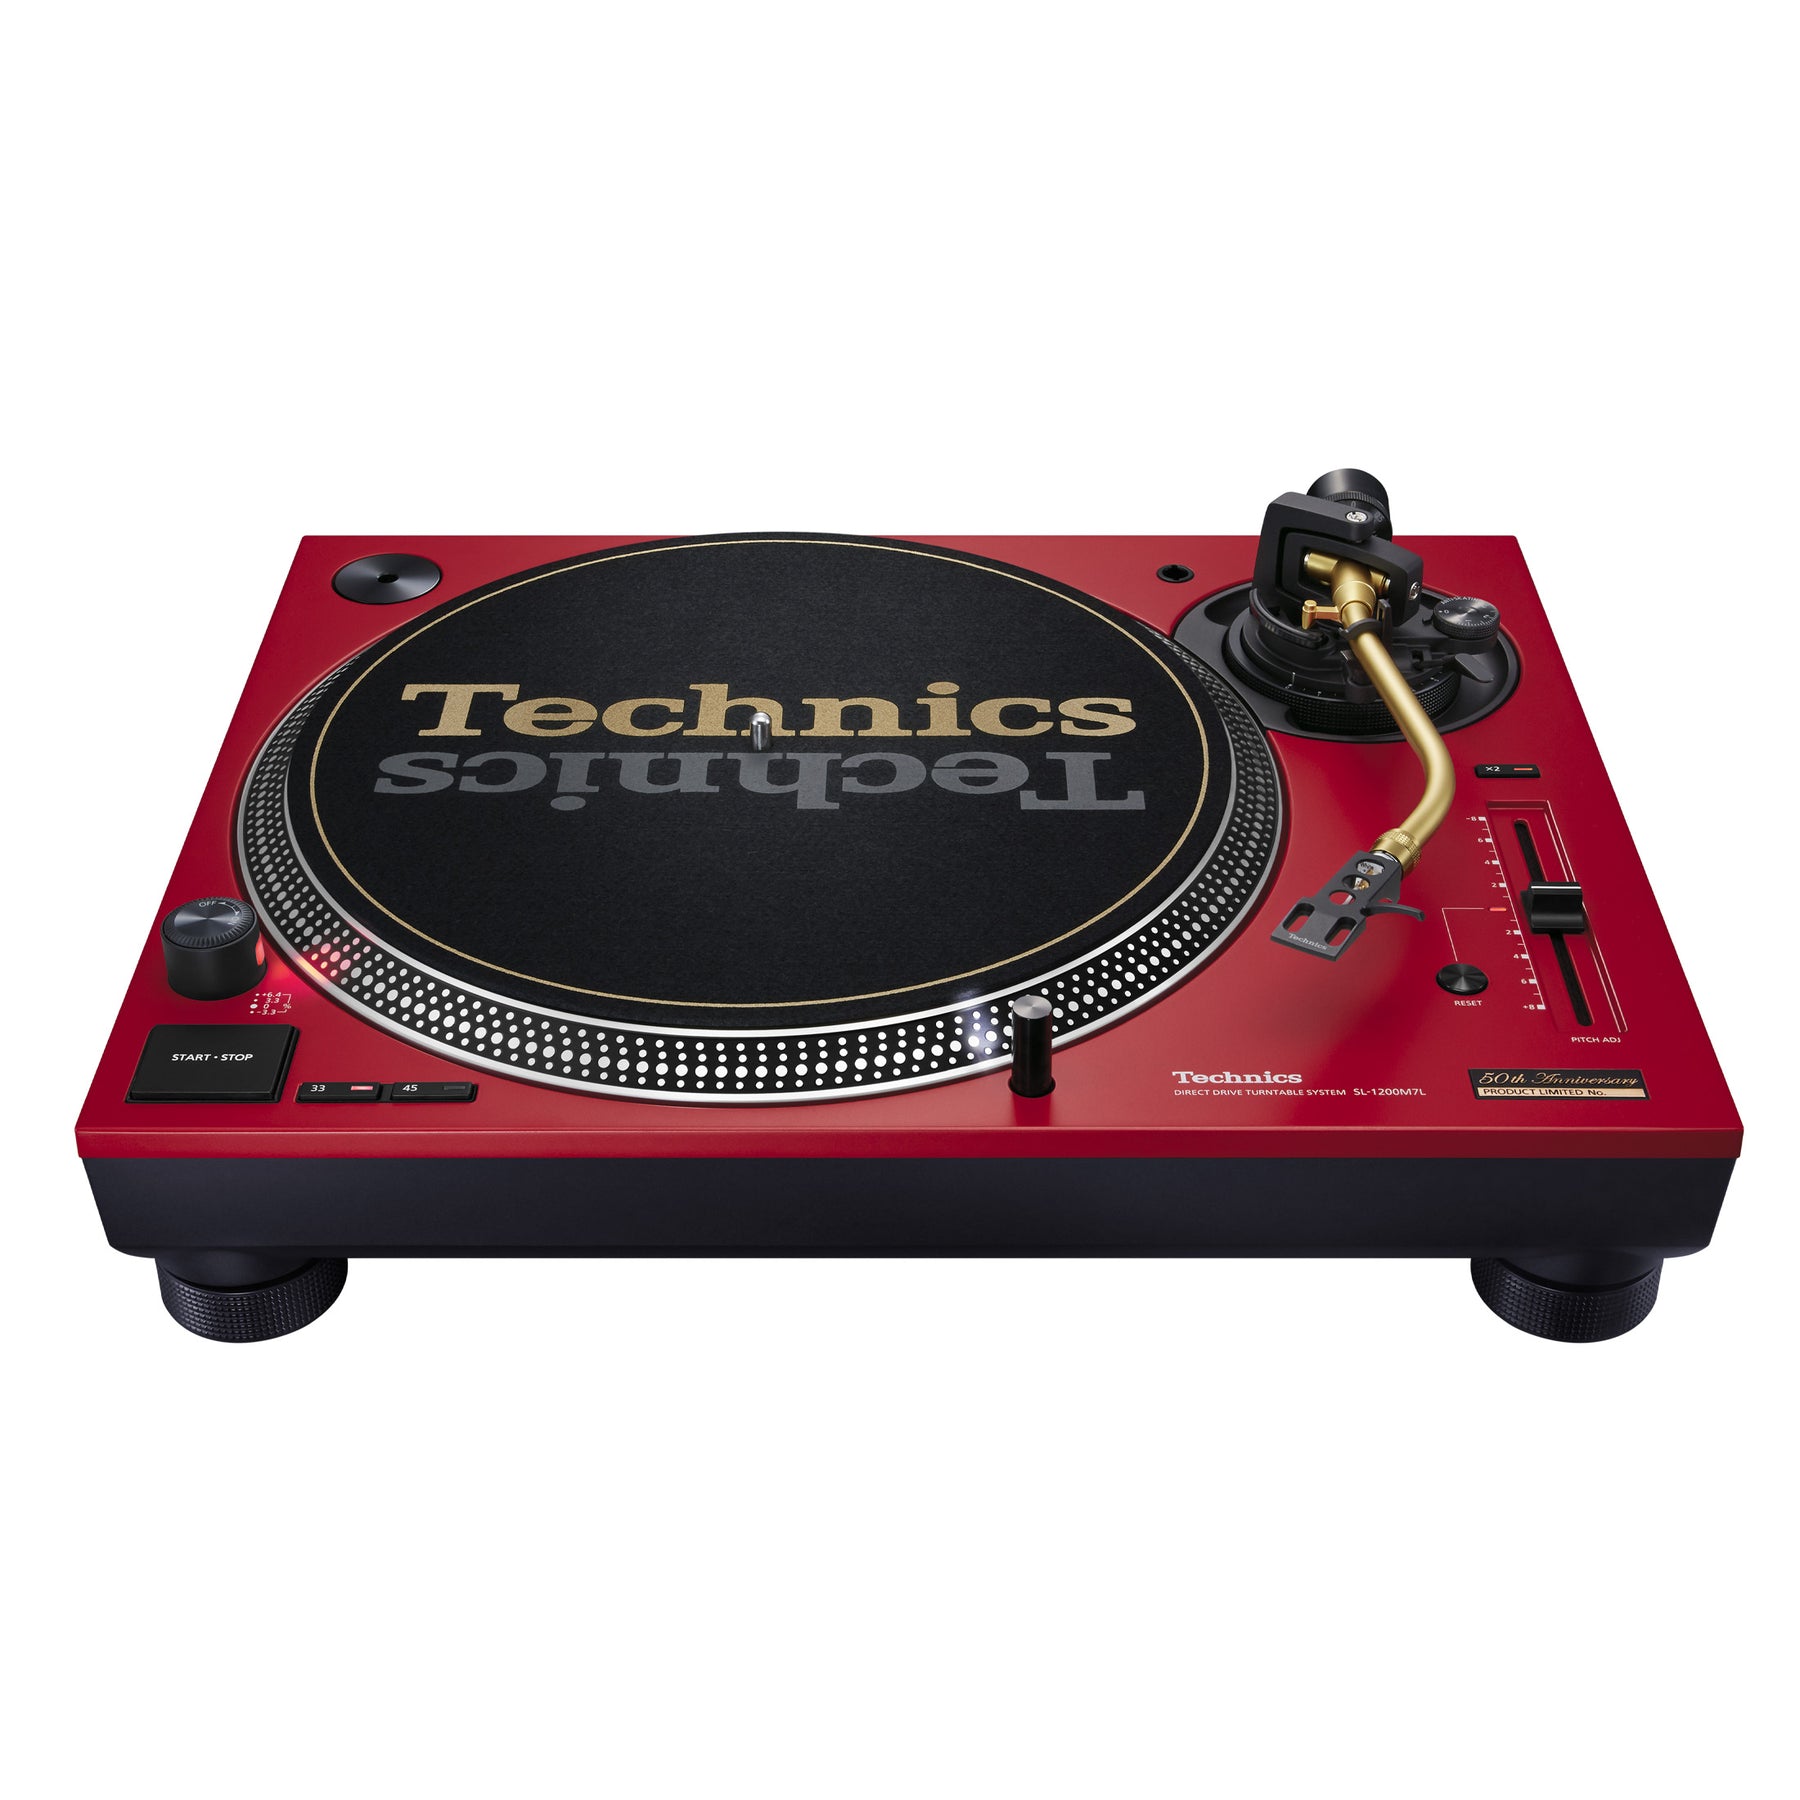 Technics' limited-edition 50th anniversary turntable comes in